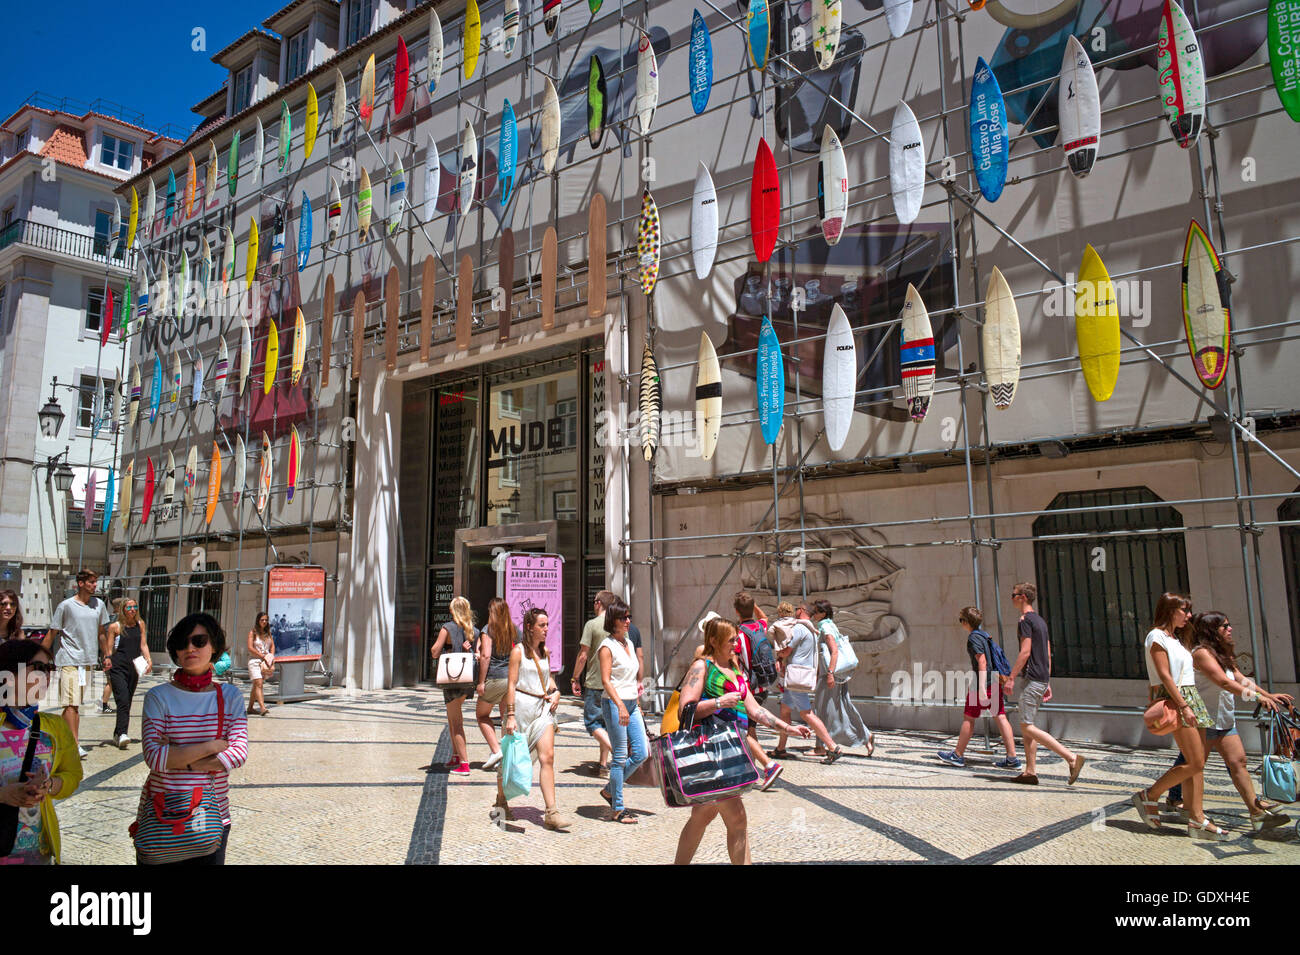 Musem MuDe in Lisbon, Portugal, 2014 Stock Photo